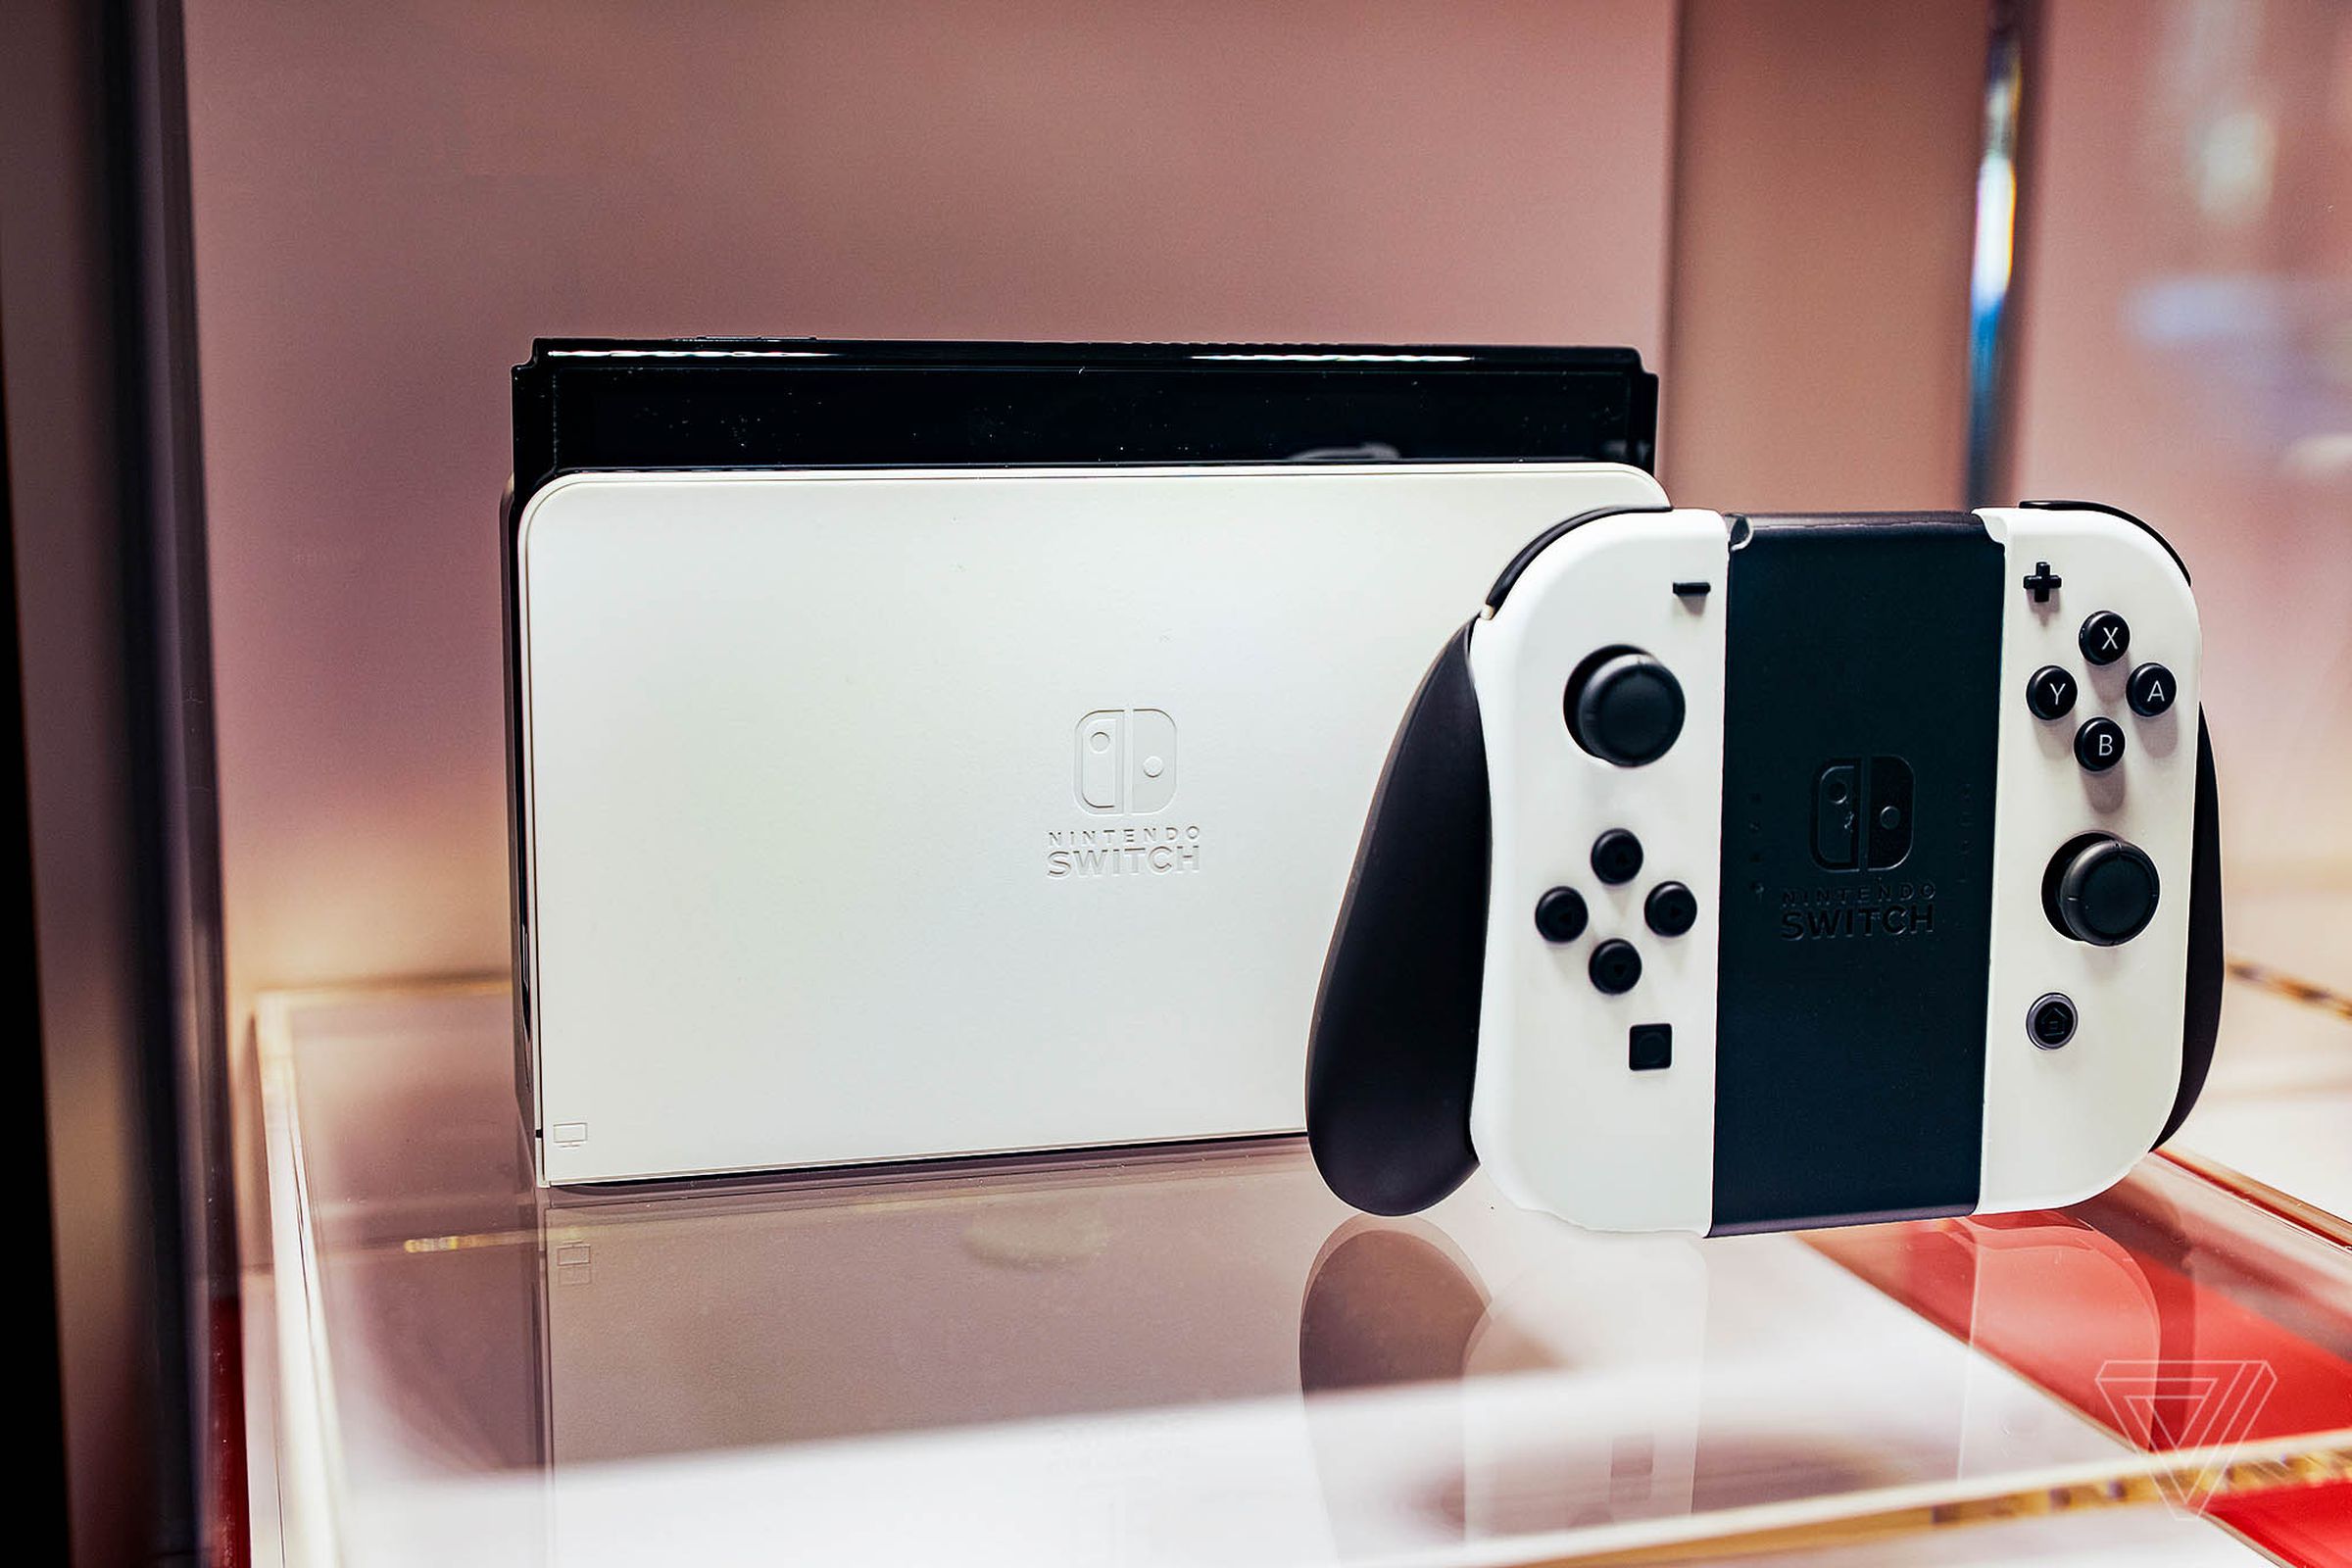 A docked Nintendo Switch OLED model sitting on a piece of glass next to its controller.